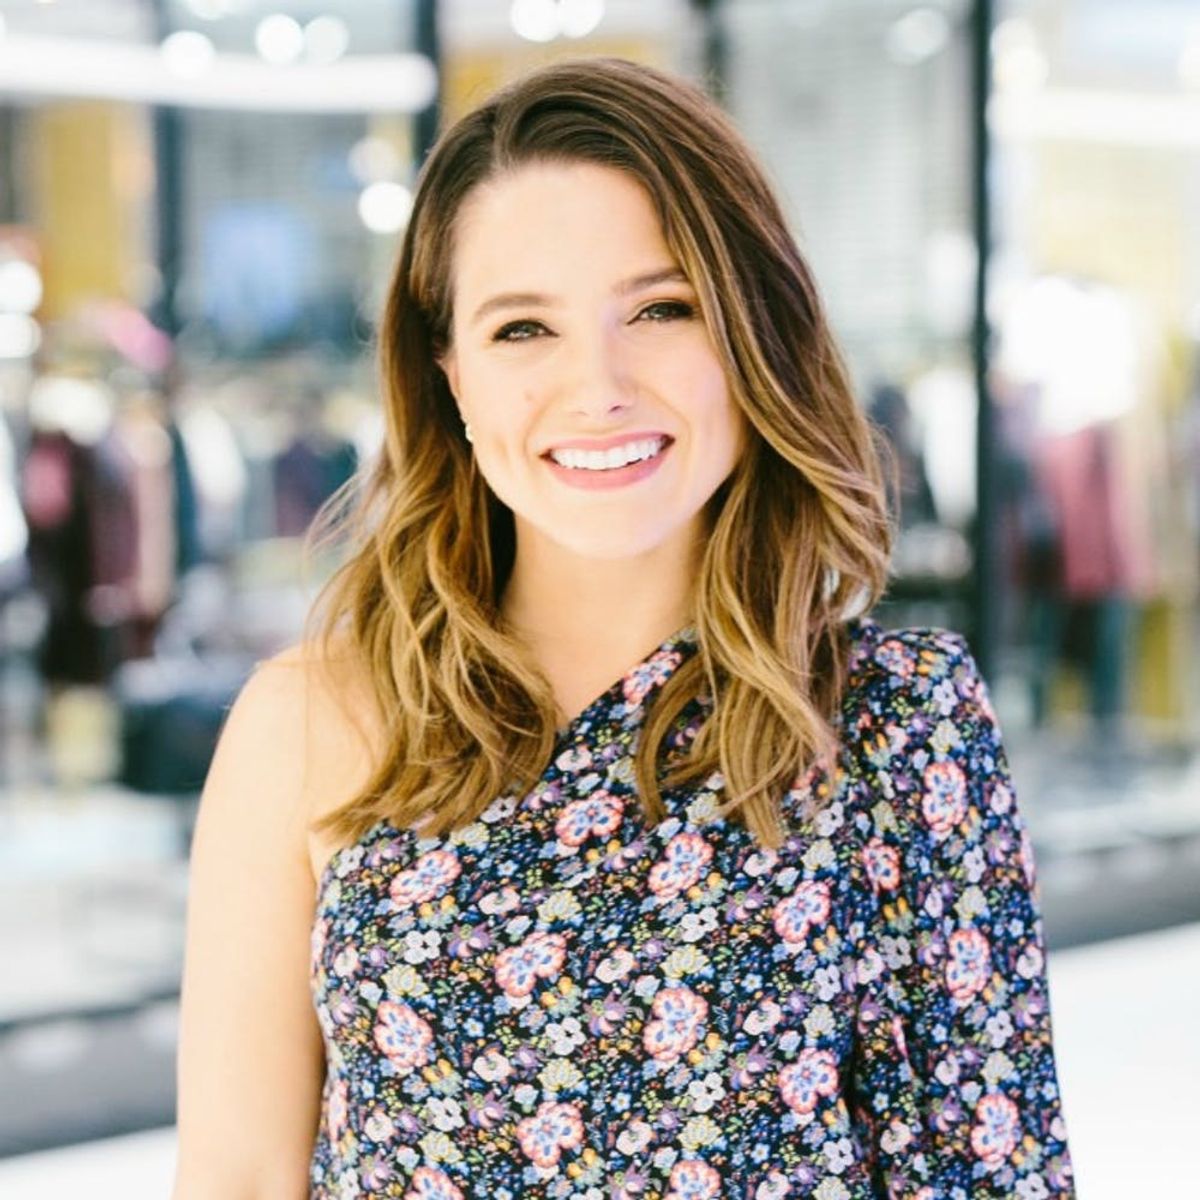 Sophia Bush Wants You to Make This 5-Minute “Free Investment” to Boost Other Women